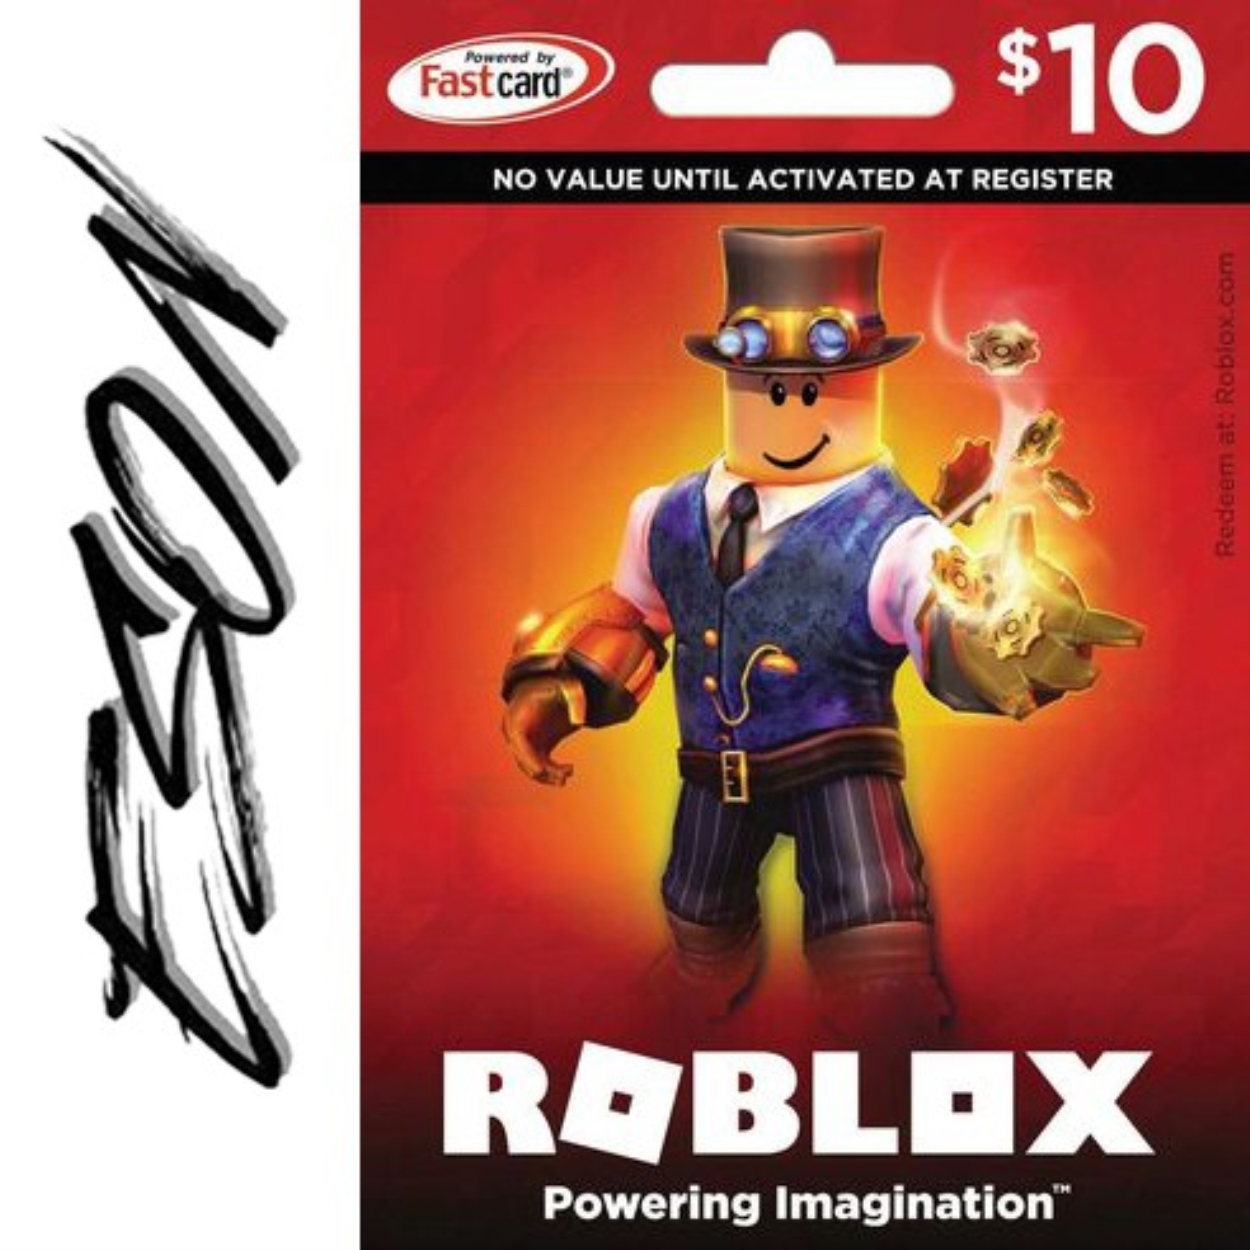 1500 Robux Shop 1500 Robux With Great Discounts And Prices Online Lazada Philippines - roblox gift card philippines lazada